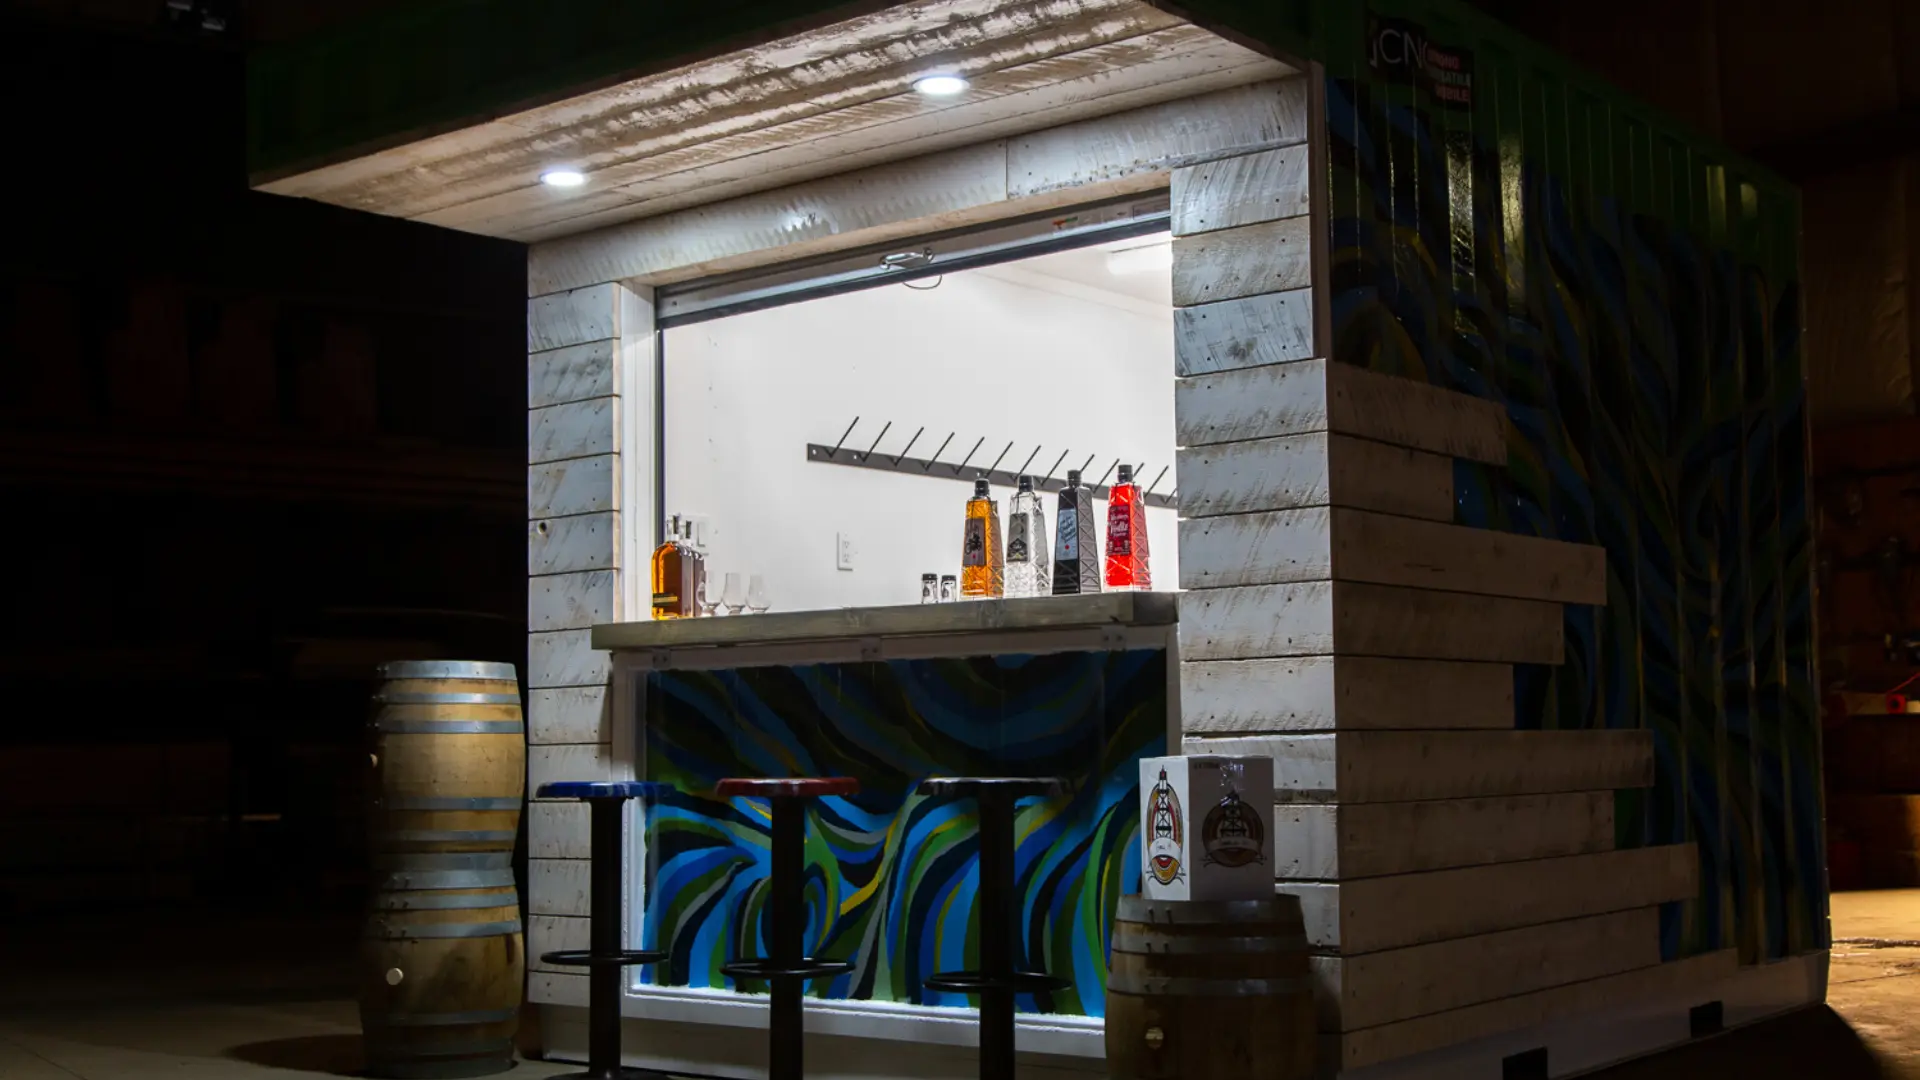 Square container repurposed as a bar with barstools